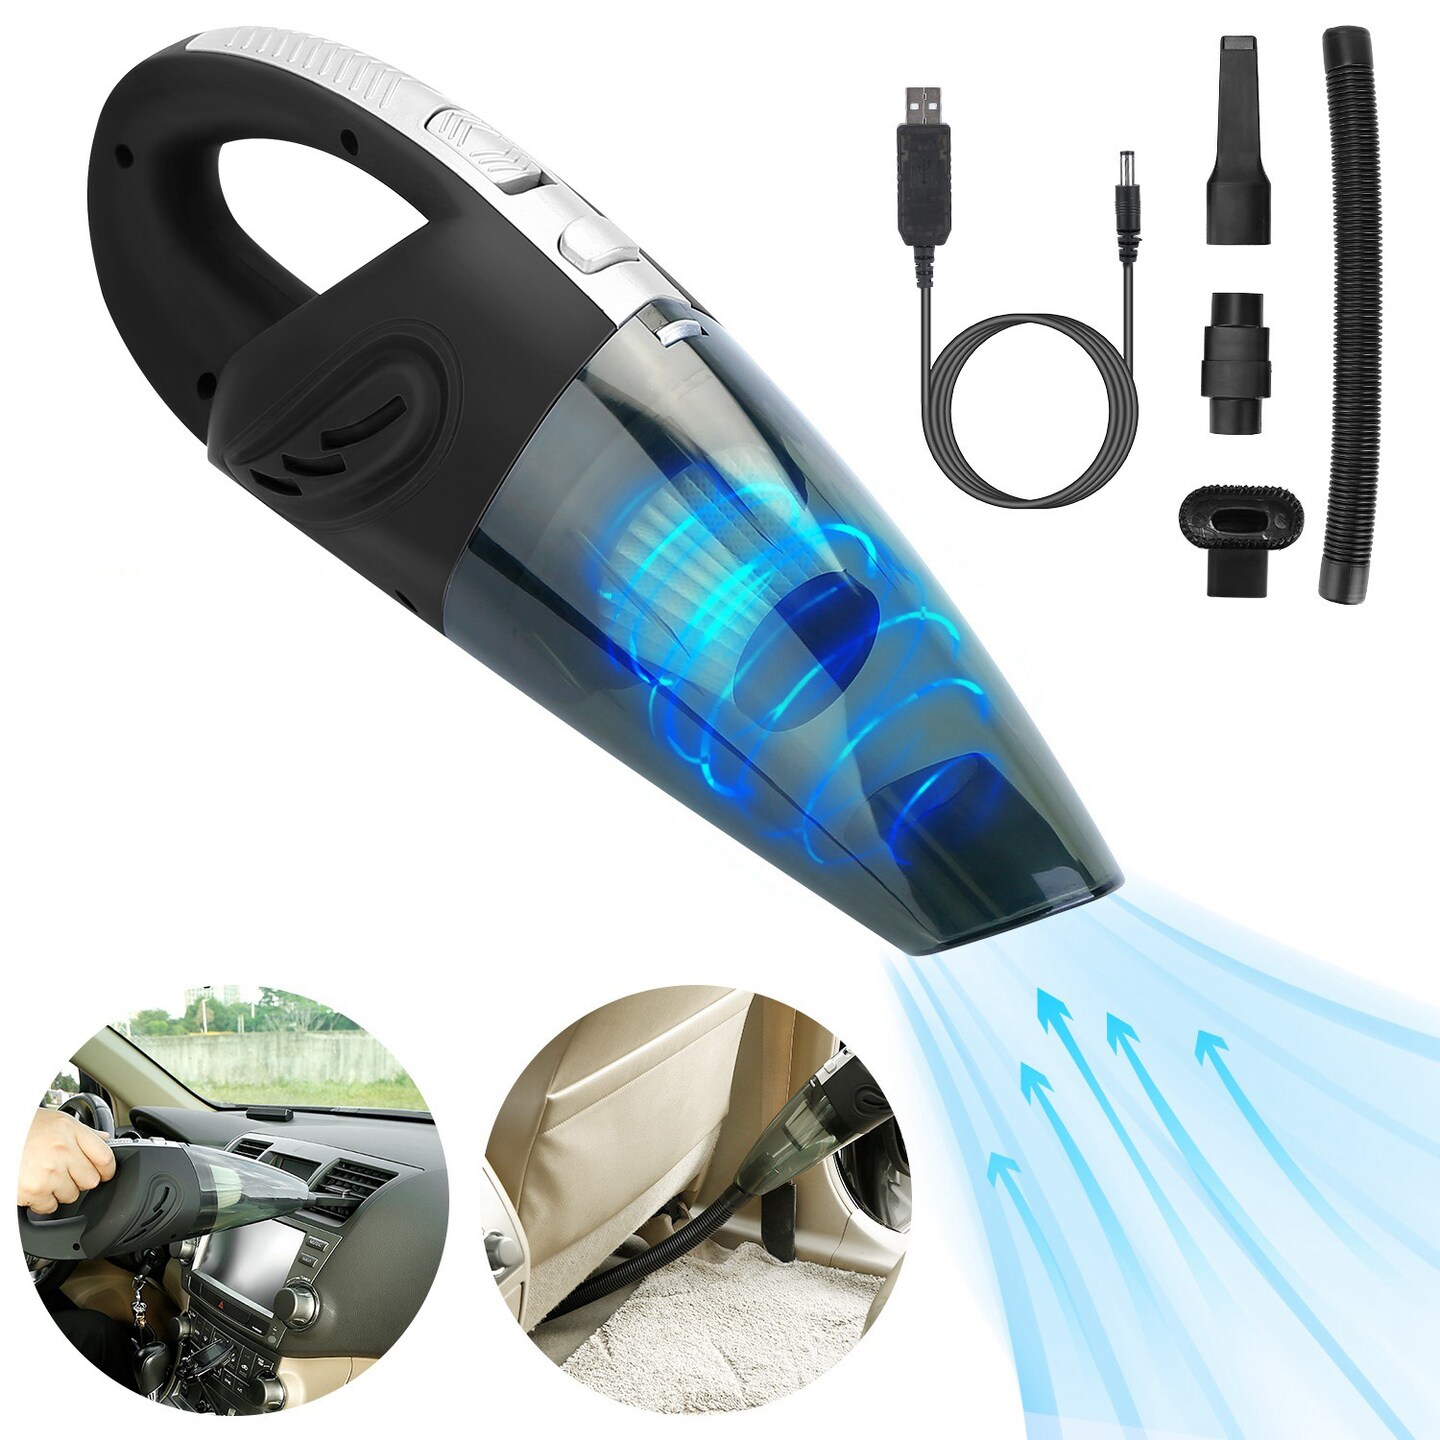 Car Vacuum Cleaner - Cordless Handheld with 4800PA Suction- Wet and Dry Use with 3 Accessories and Filter